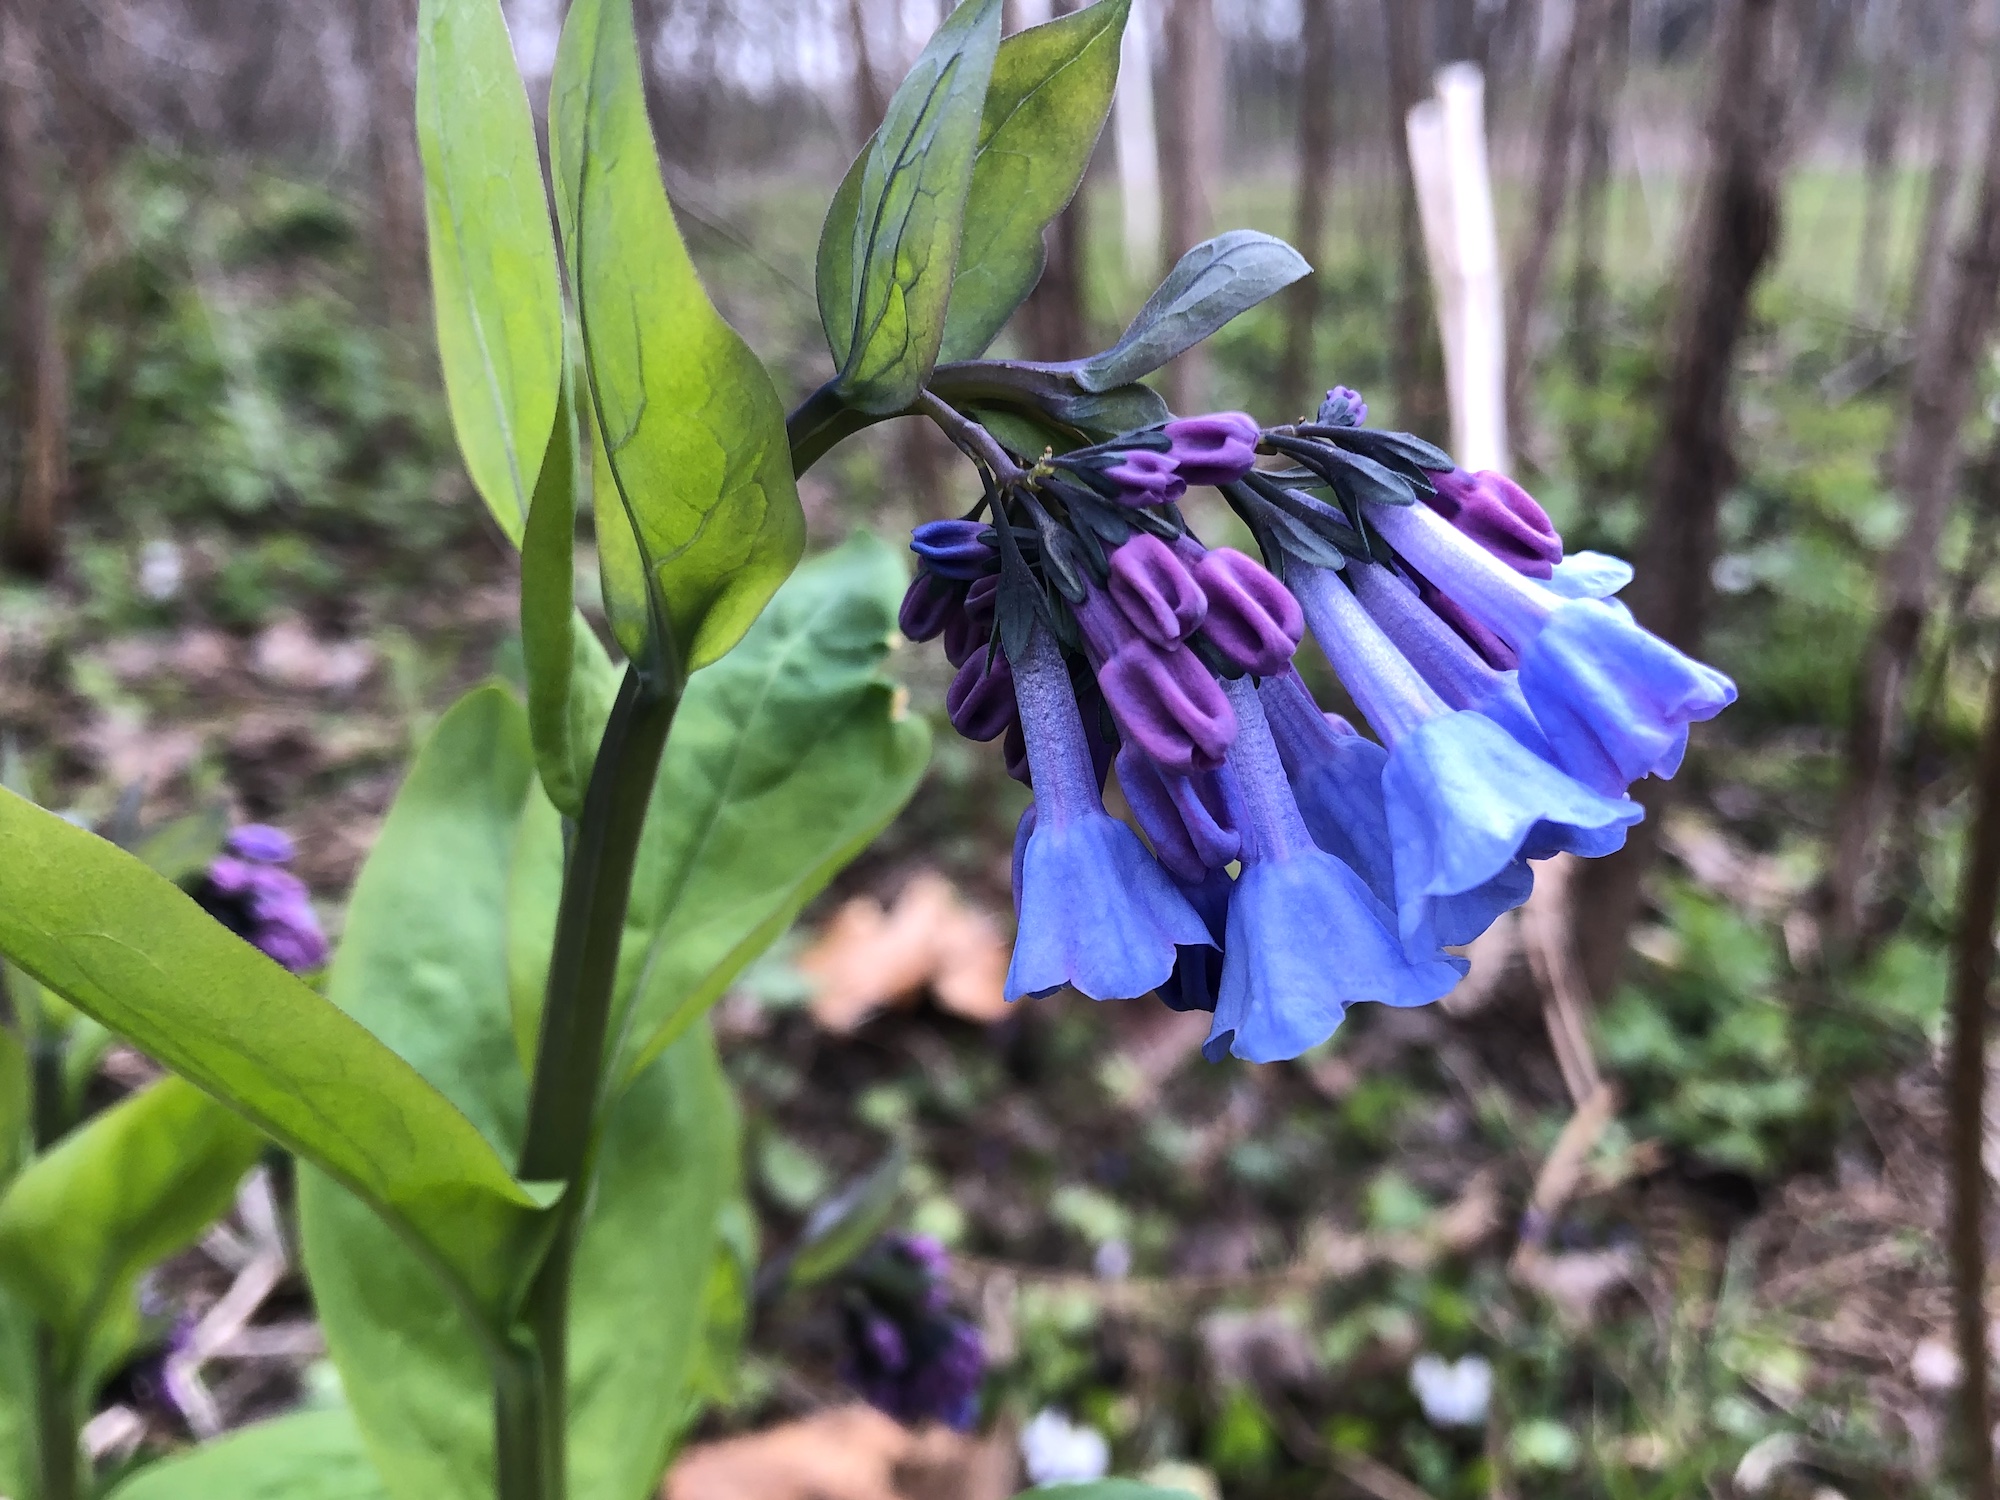 Virginia Bluebells in woods between Marion Dunn and Oak Savanna in Madison, Wisconsin on April 25, 2020.